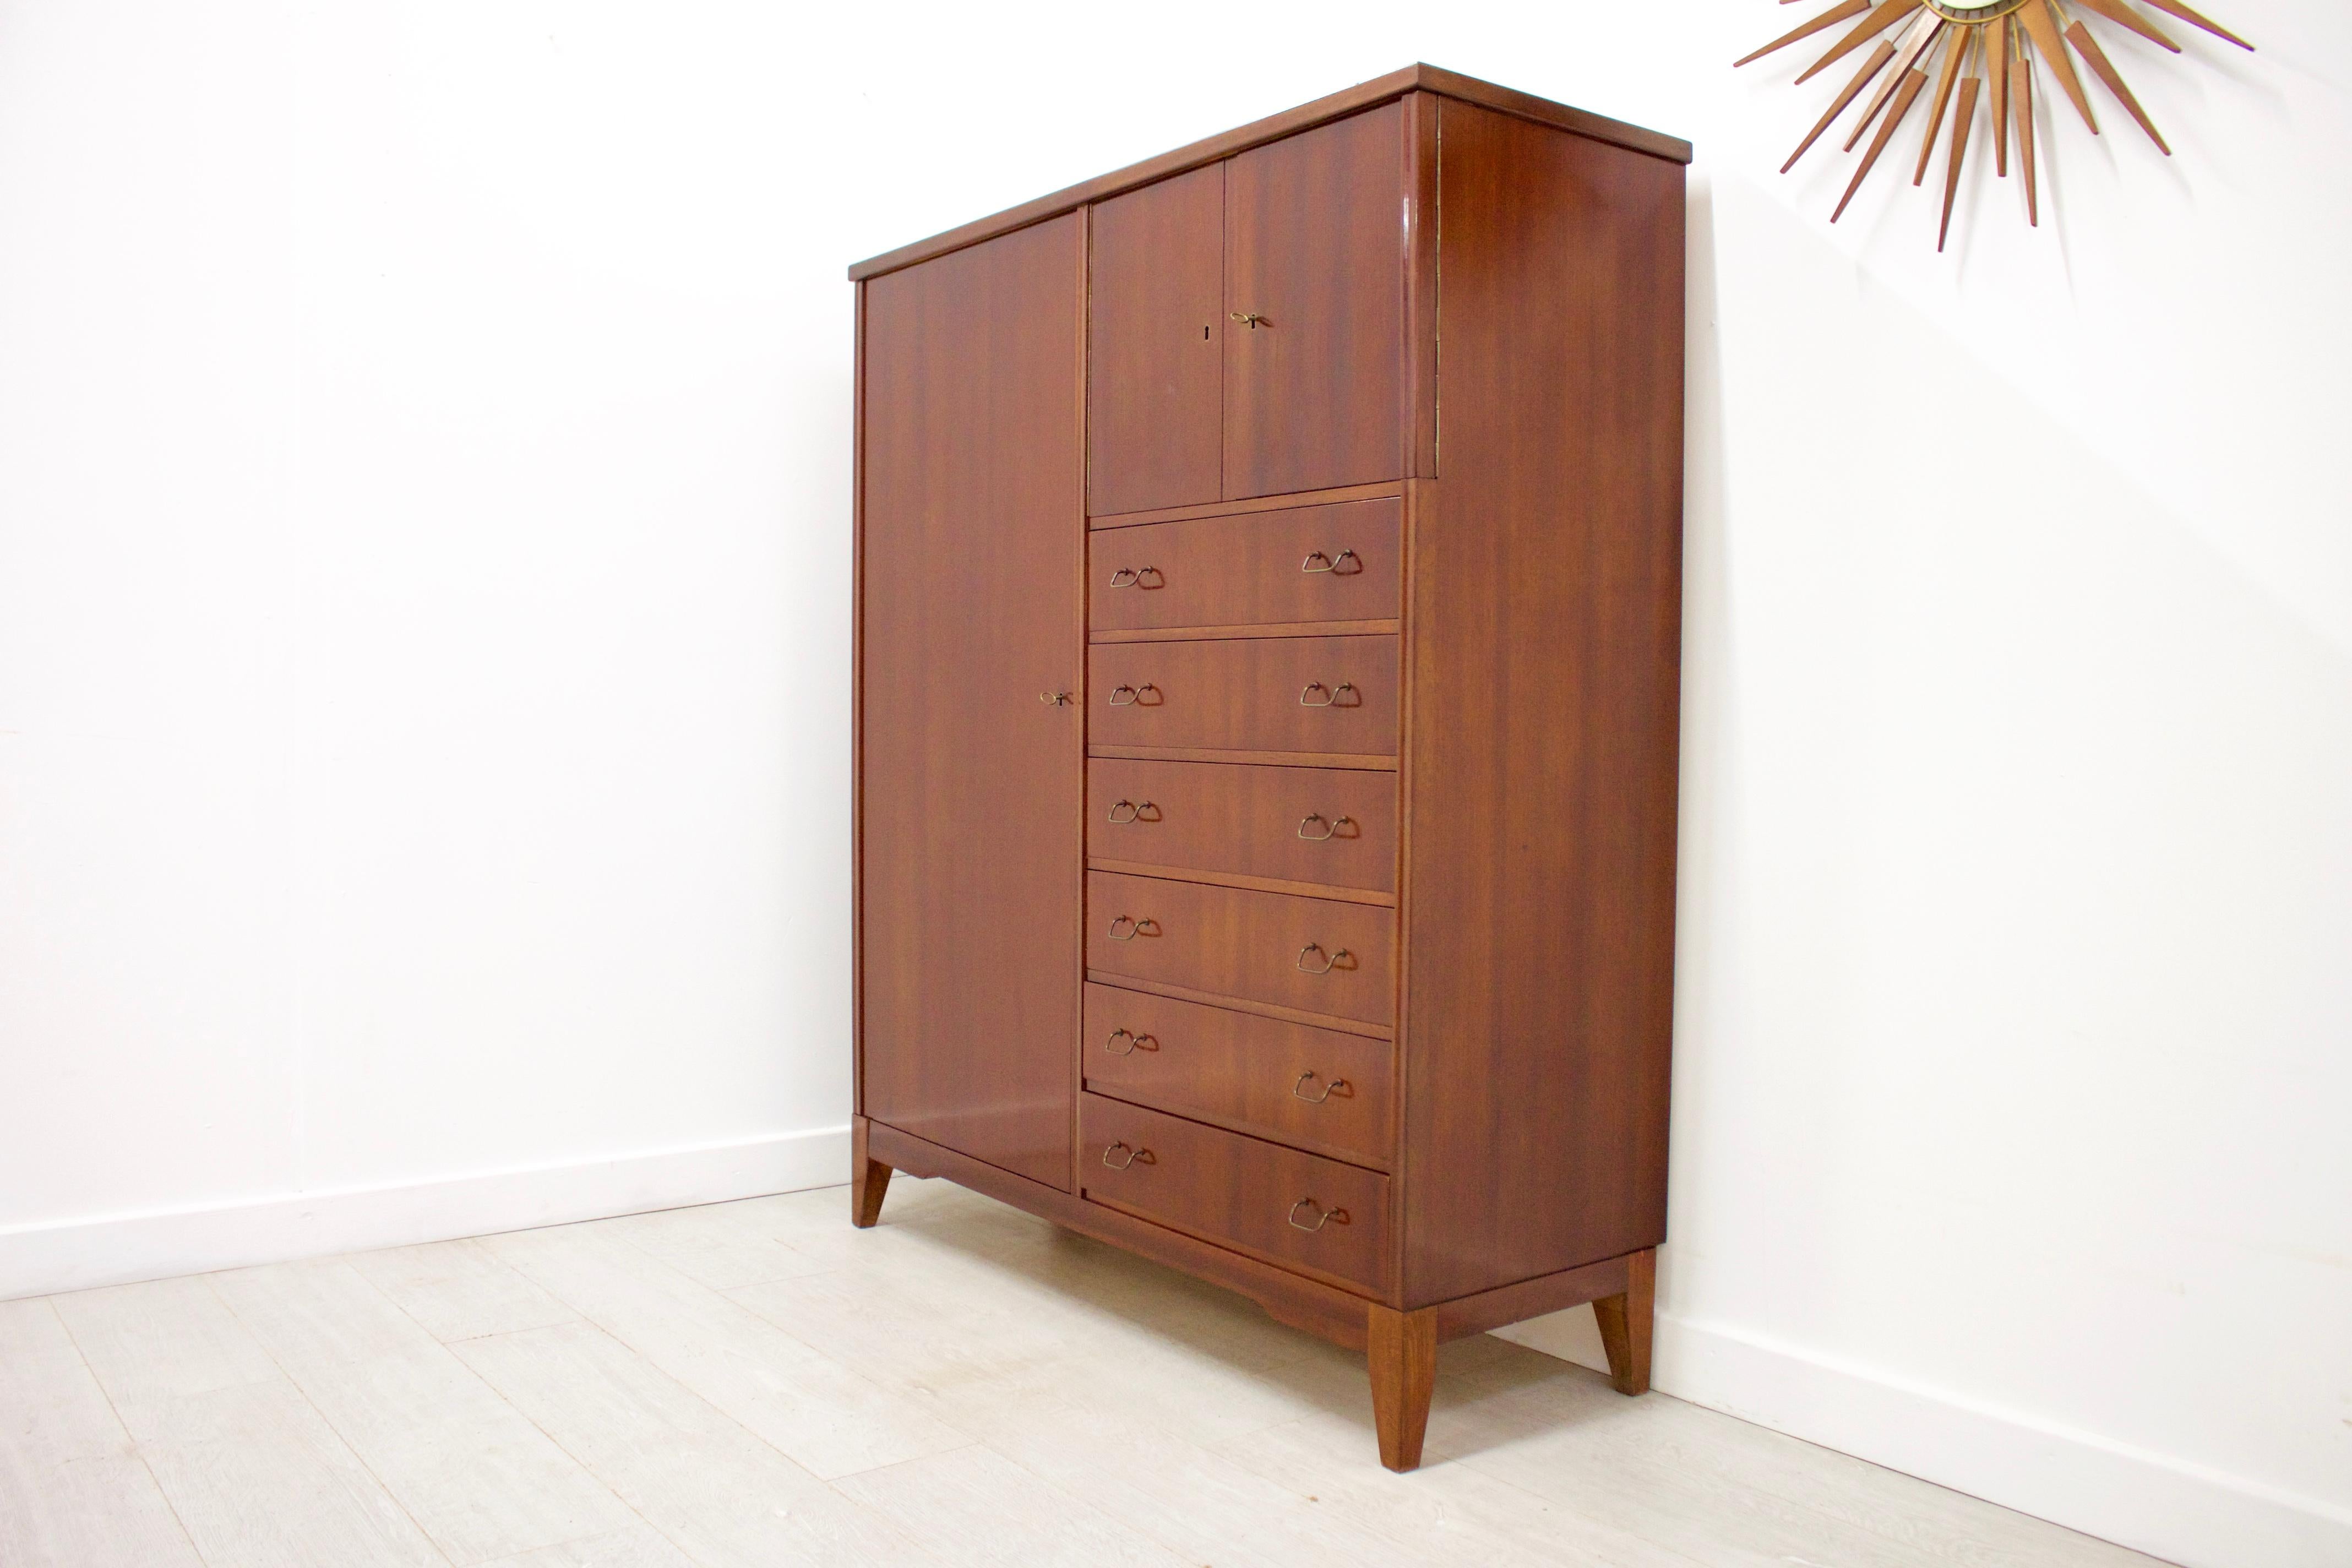 - Mid-Century Modern linen cabinet / cupboard or tallboy
- Made in Denmark
- Made from solid wood and veneer.